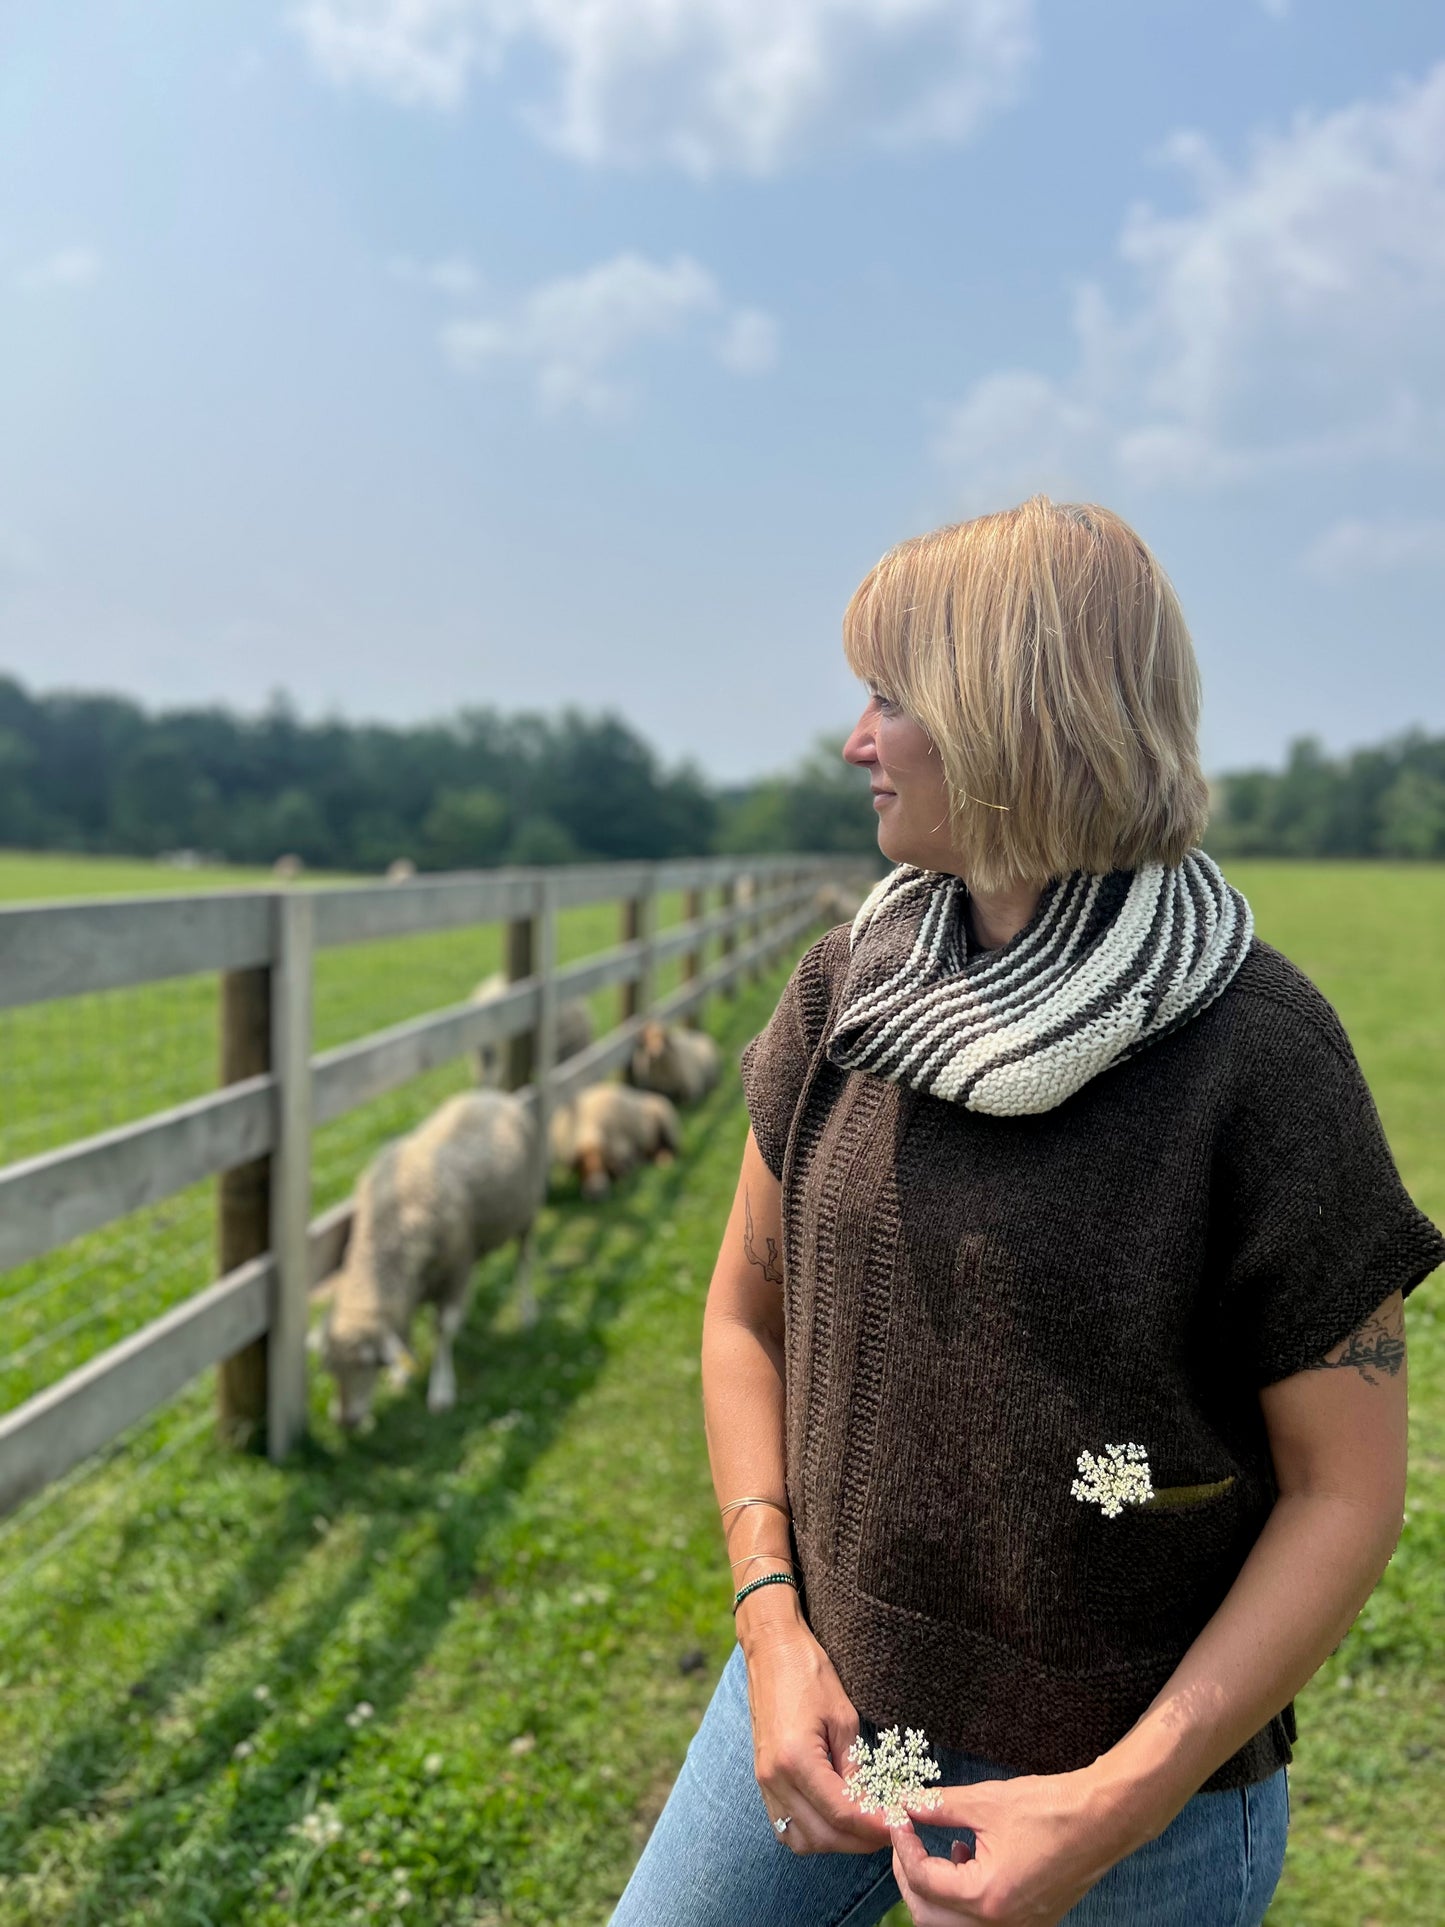 Sherry stands at the fenceline with her flock wearing a Turbulence Cowl and Alanis Sweater